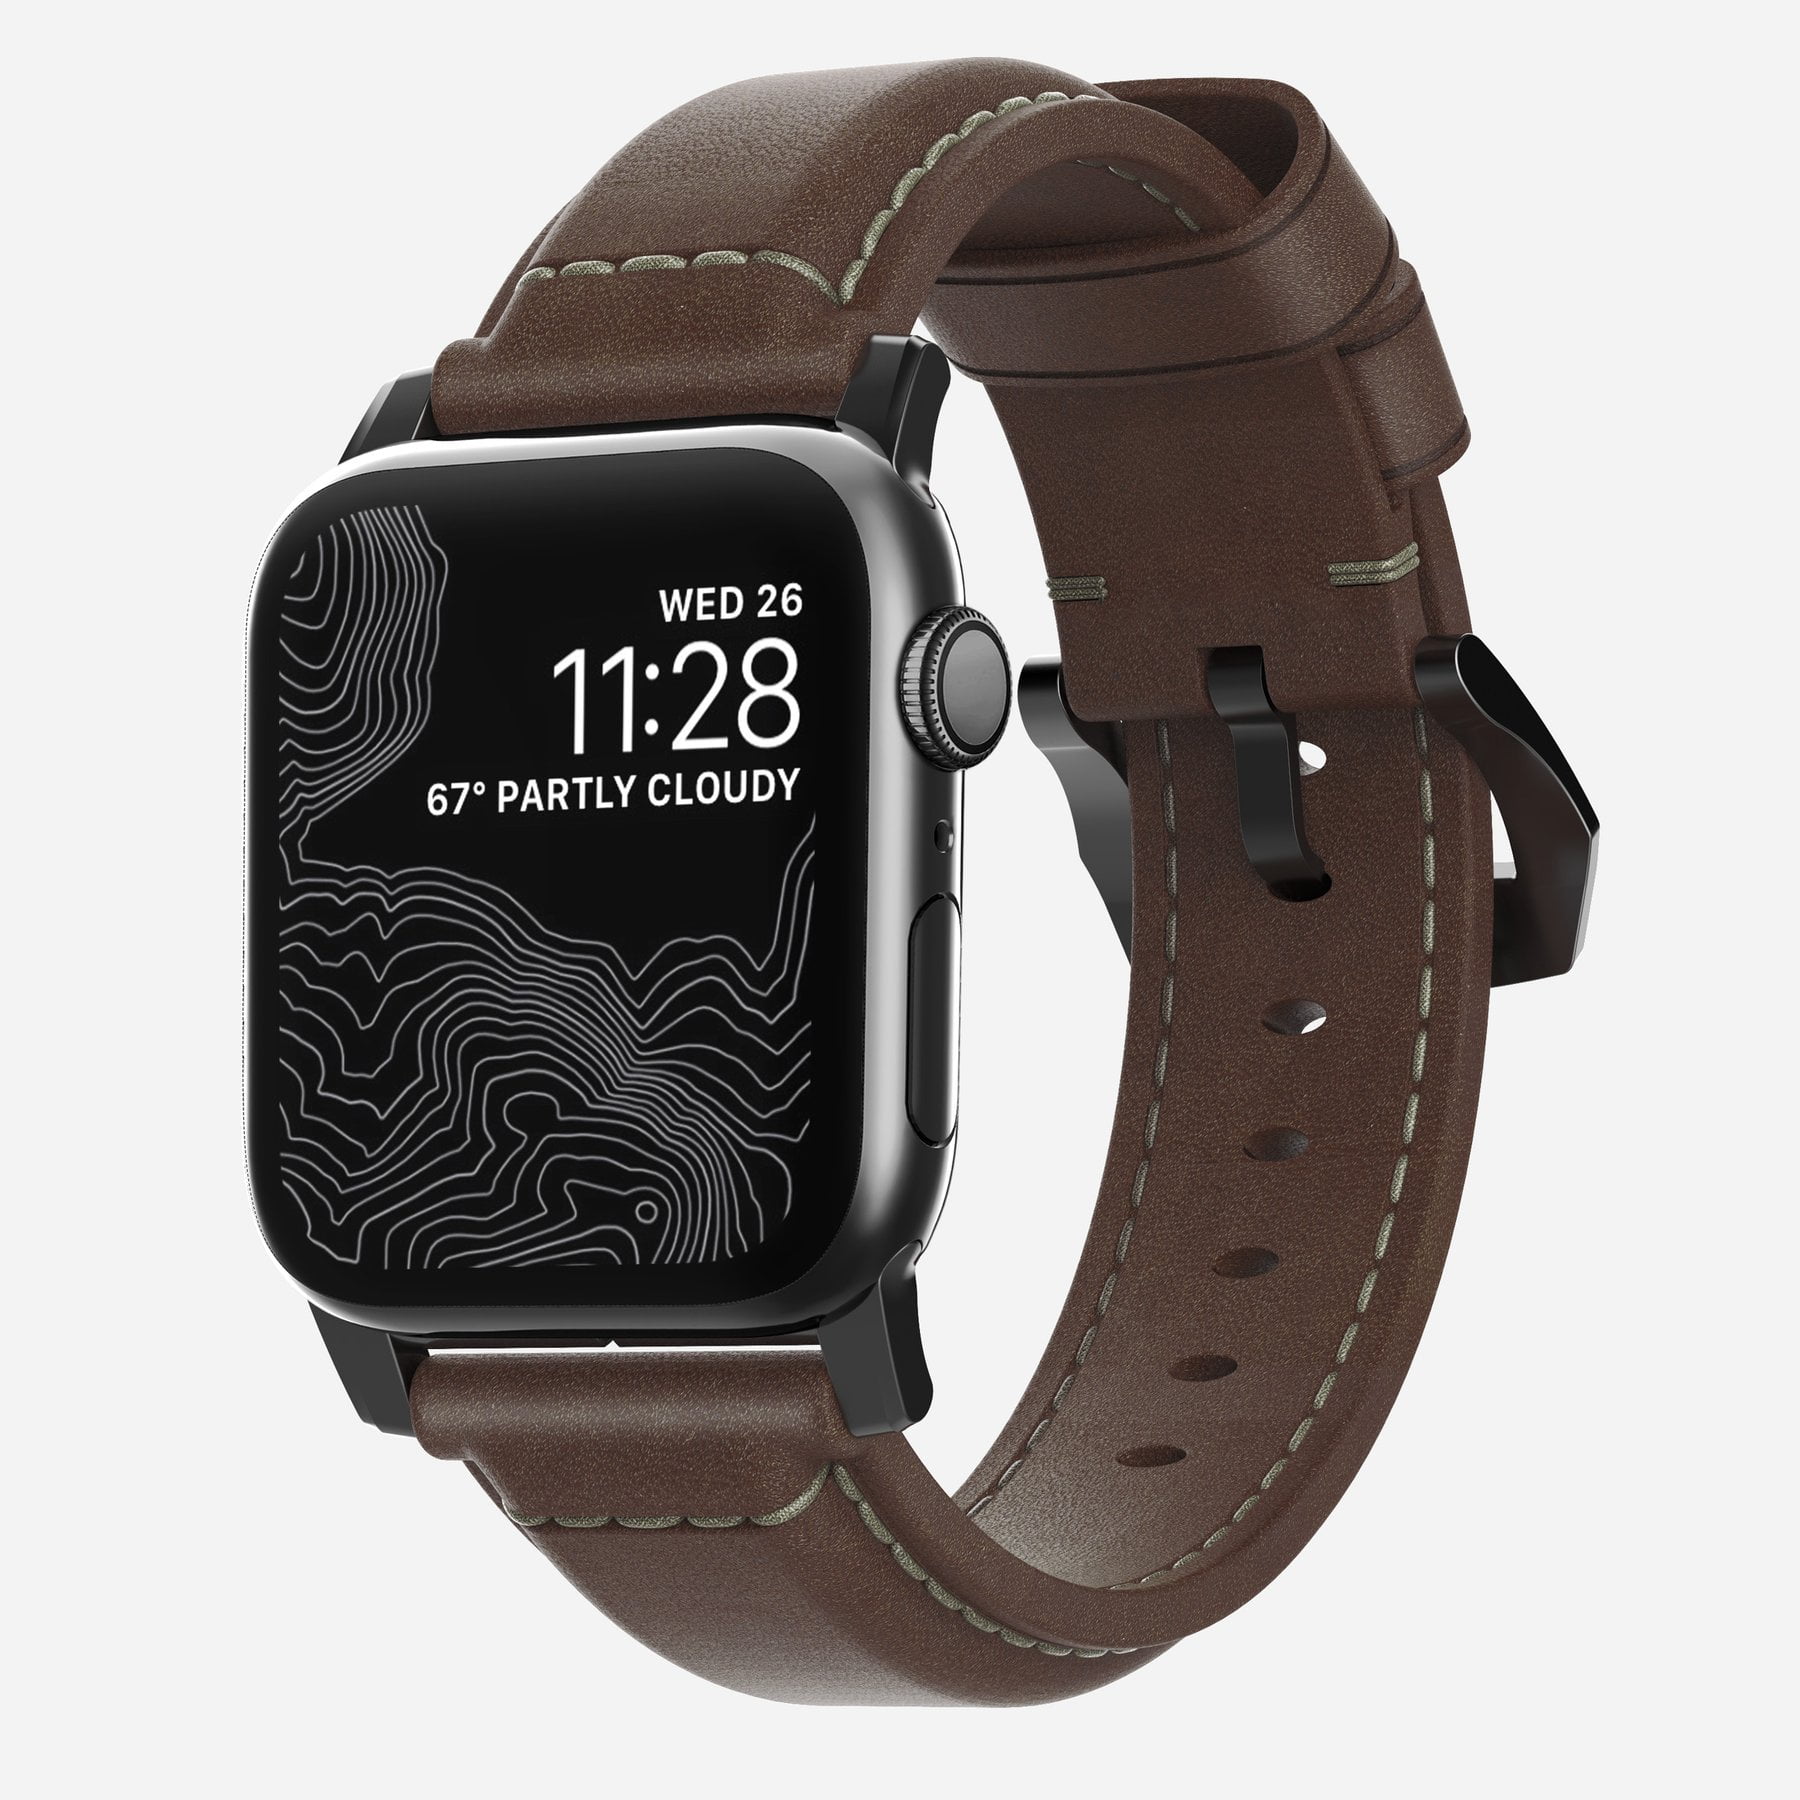 https://www.band-band.com/wp-content/uploads/2019/01/band-band-nomad-traditional-strap-apple-watch-40-44mm-black-front-1.jpg